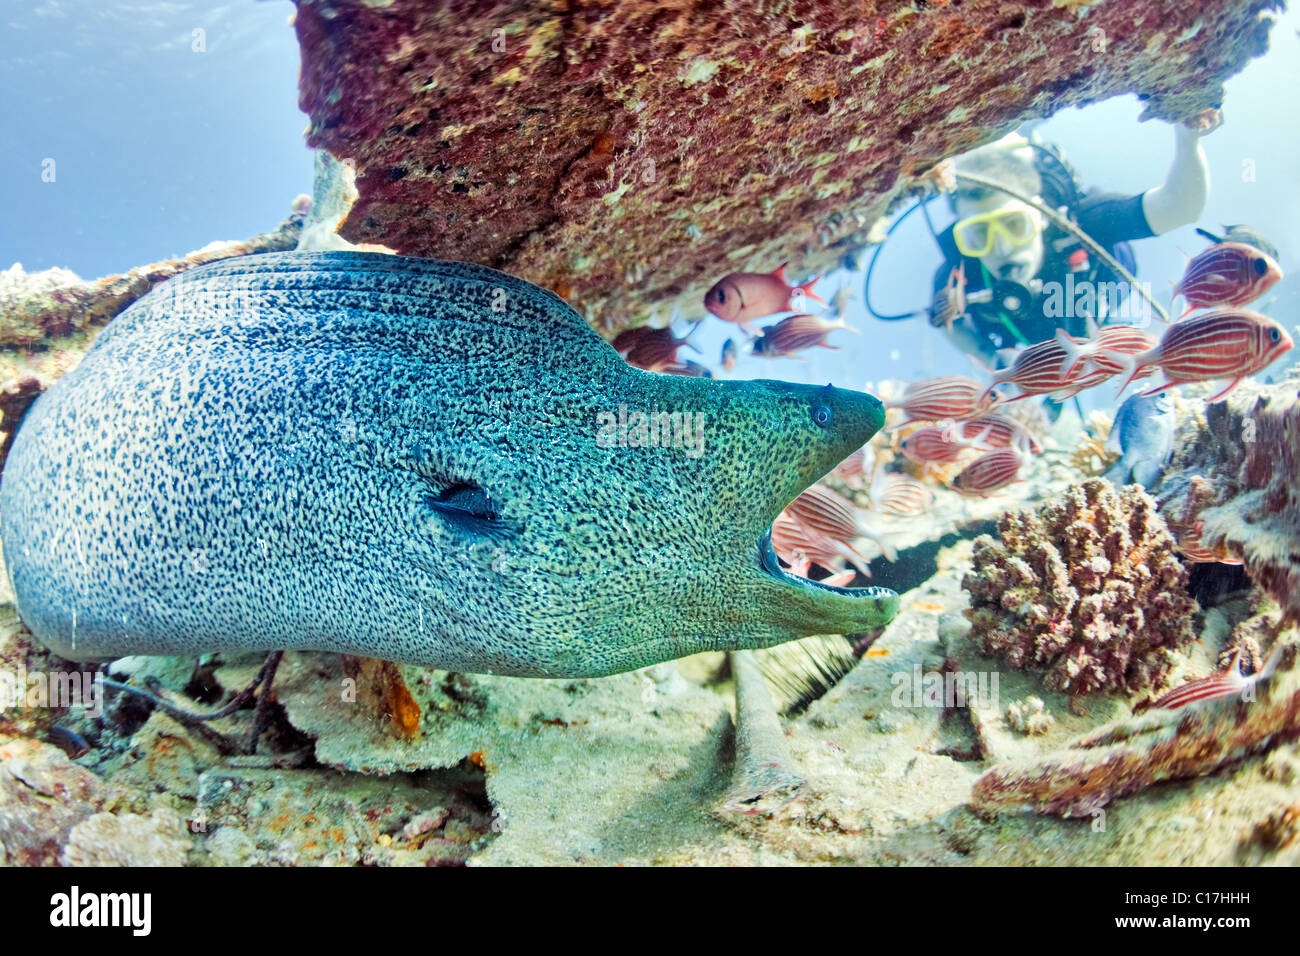 A scuba diver catches the attention of a Giant Moray Eel under the Gubal Lagoon barge shipwreck at Bluff Point in the Red Sea. Stock Photo